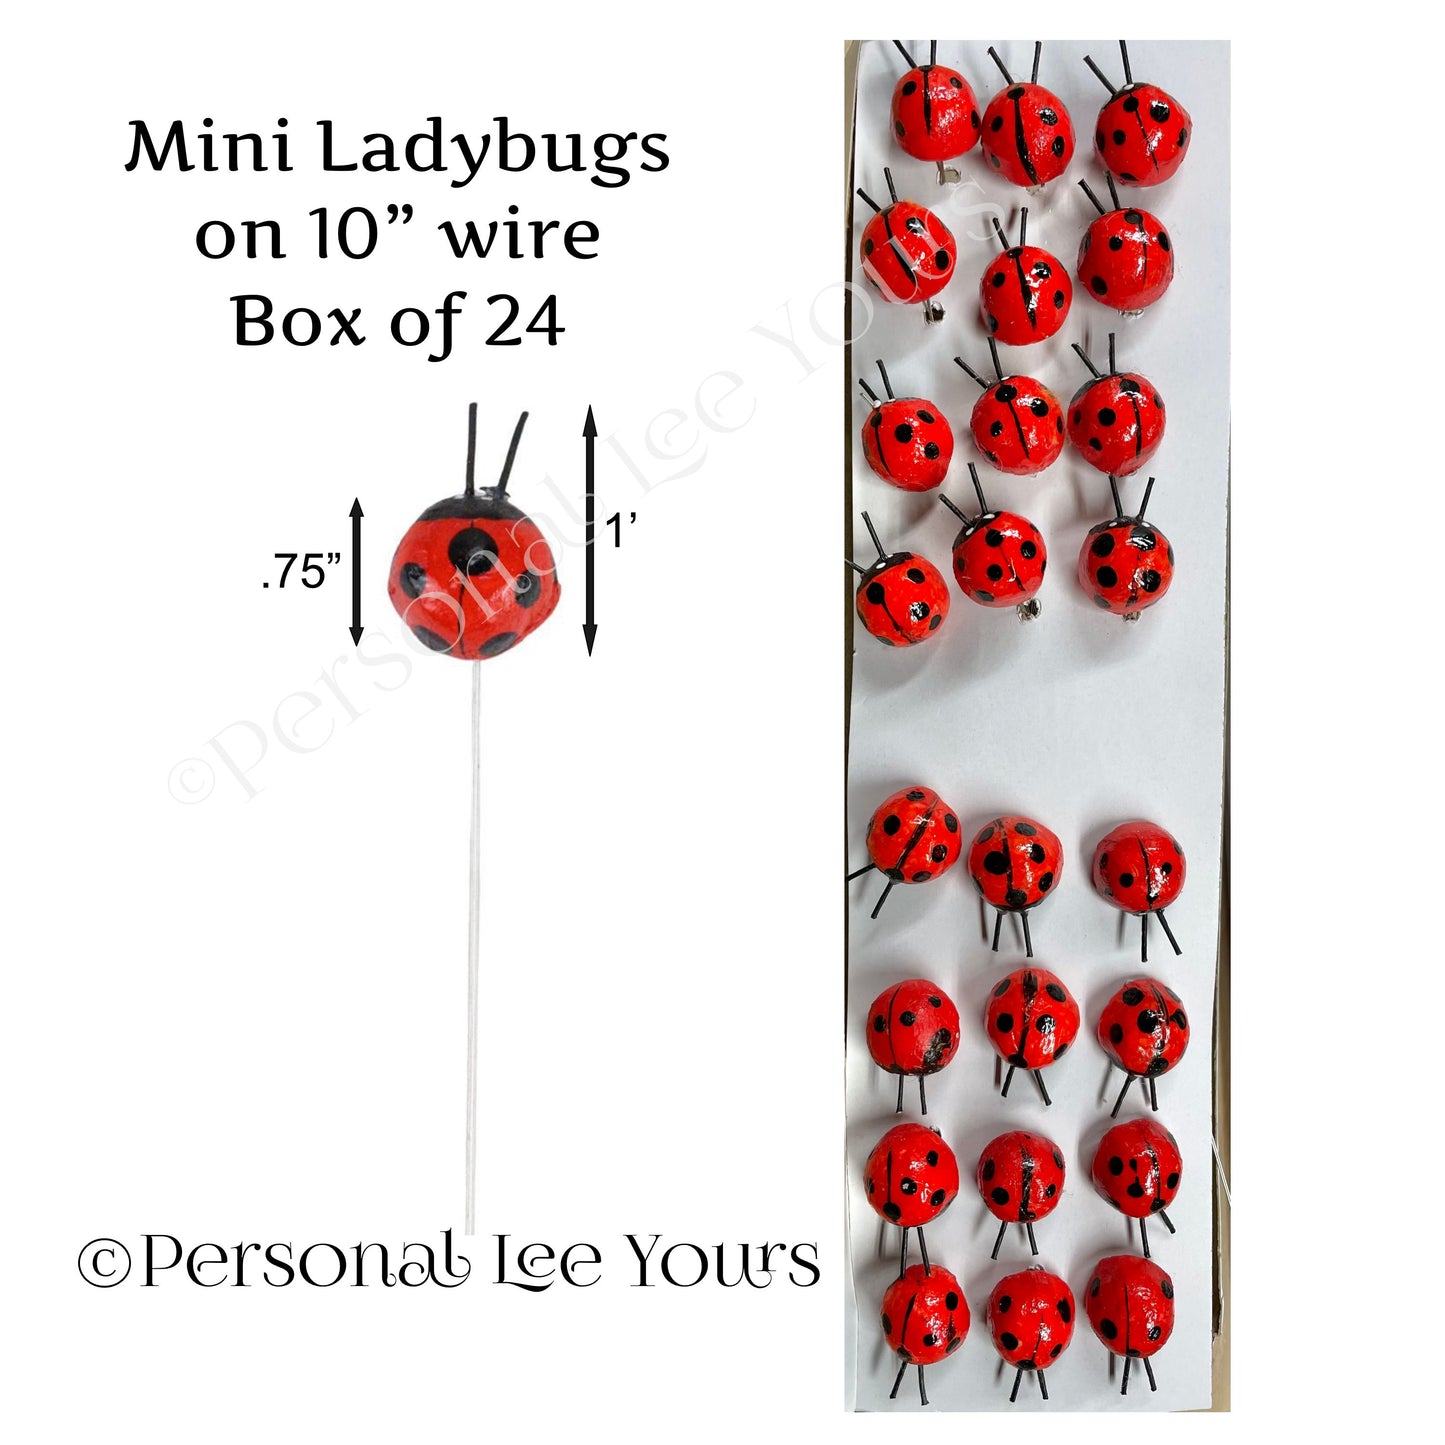 Wreath Accent * Mini Ladybugs on Wire * Box of 24 * .75" Wide * 10" Wire* MB9741